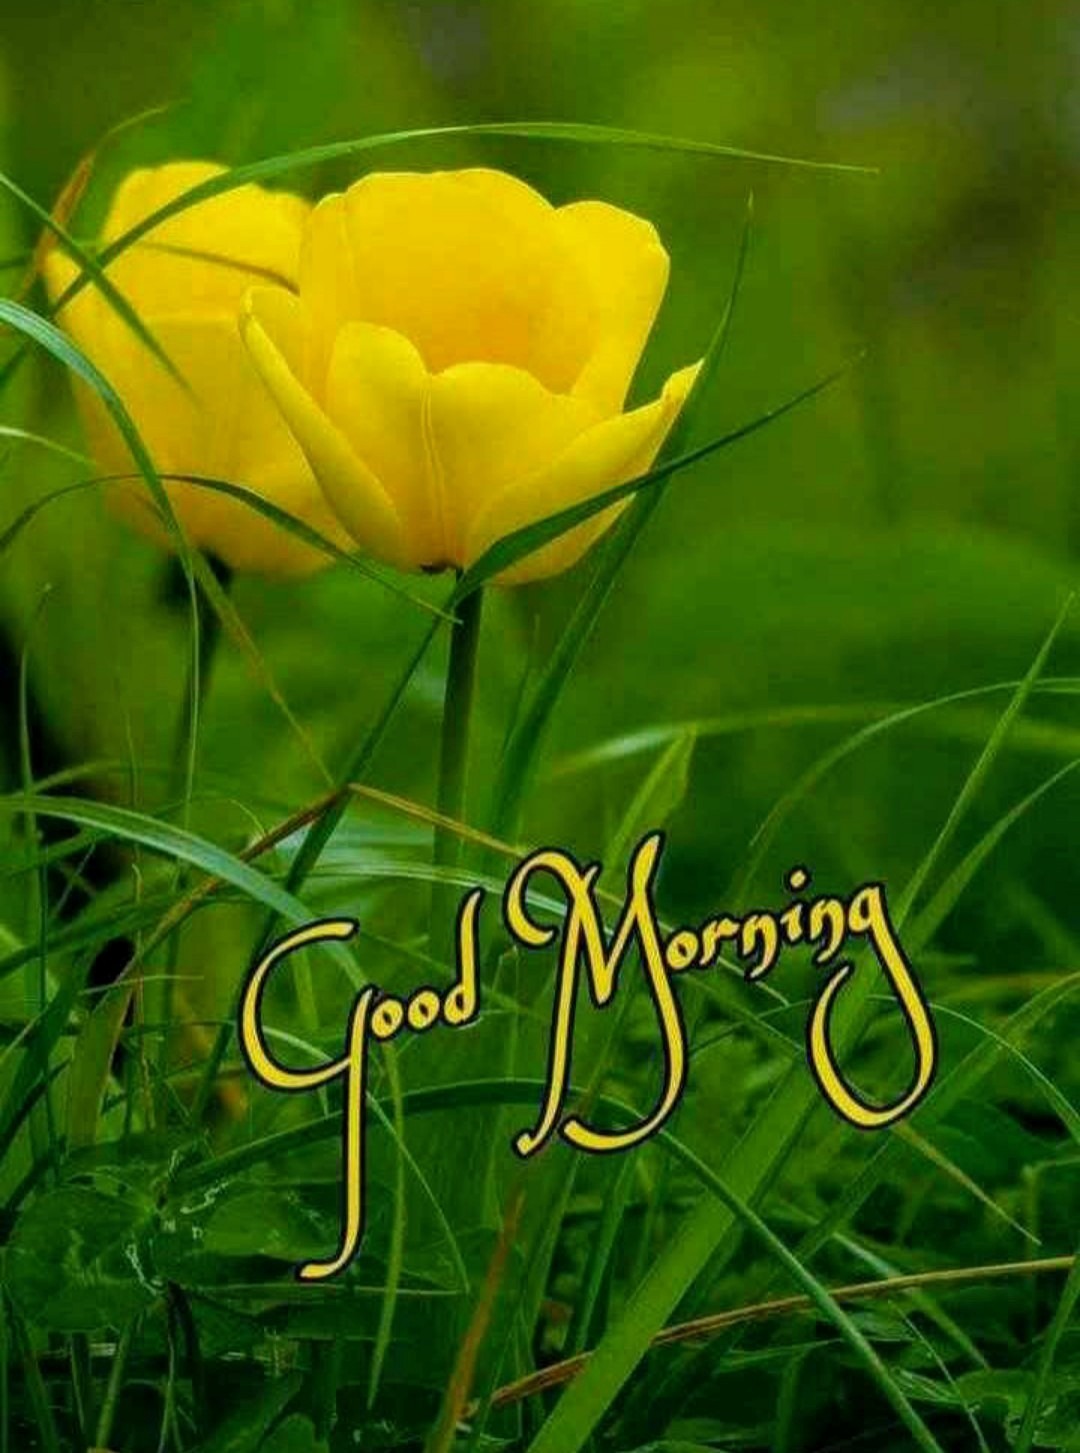 Good Morning With Yellow Flowers - DesiComments.com